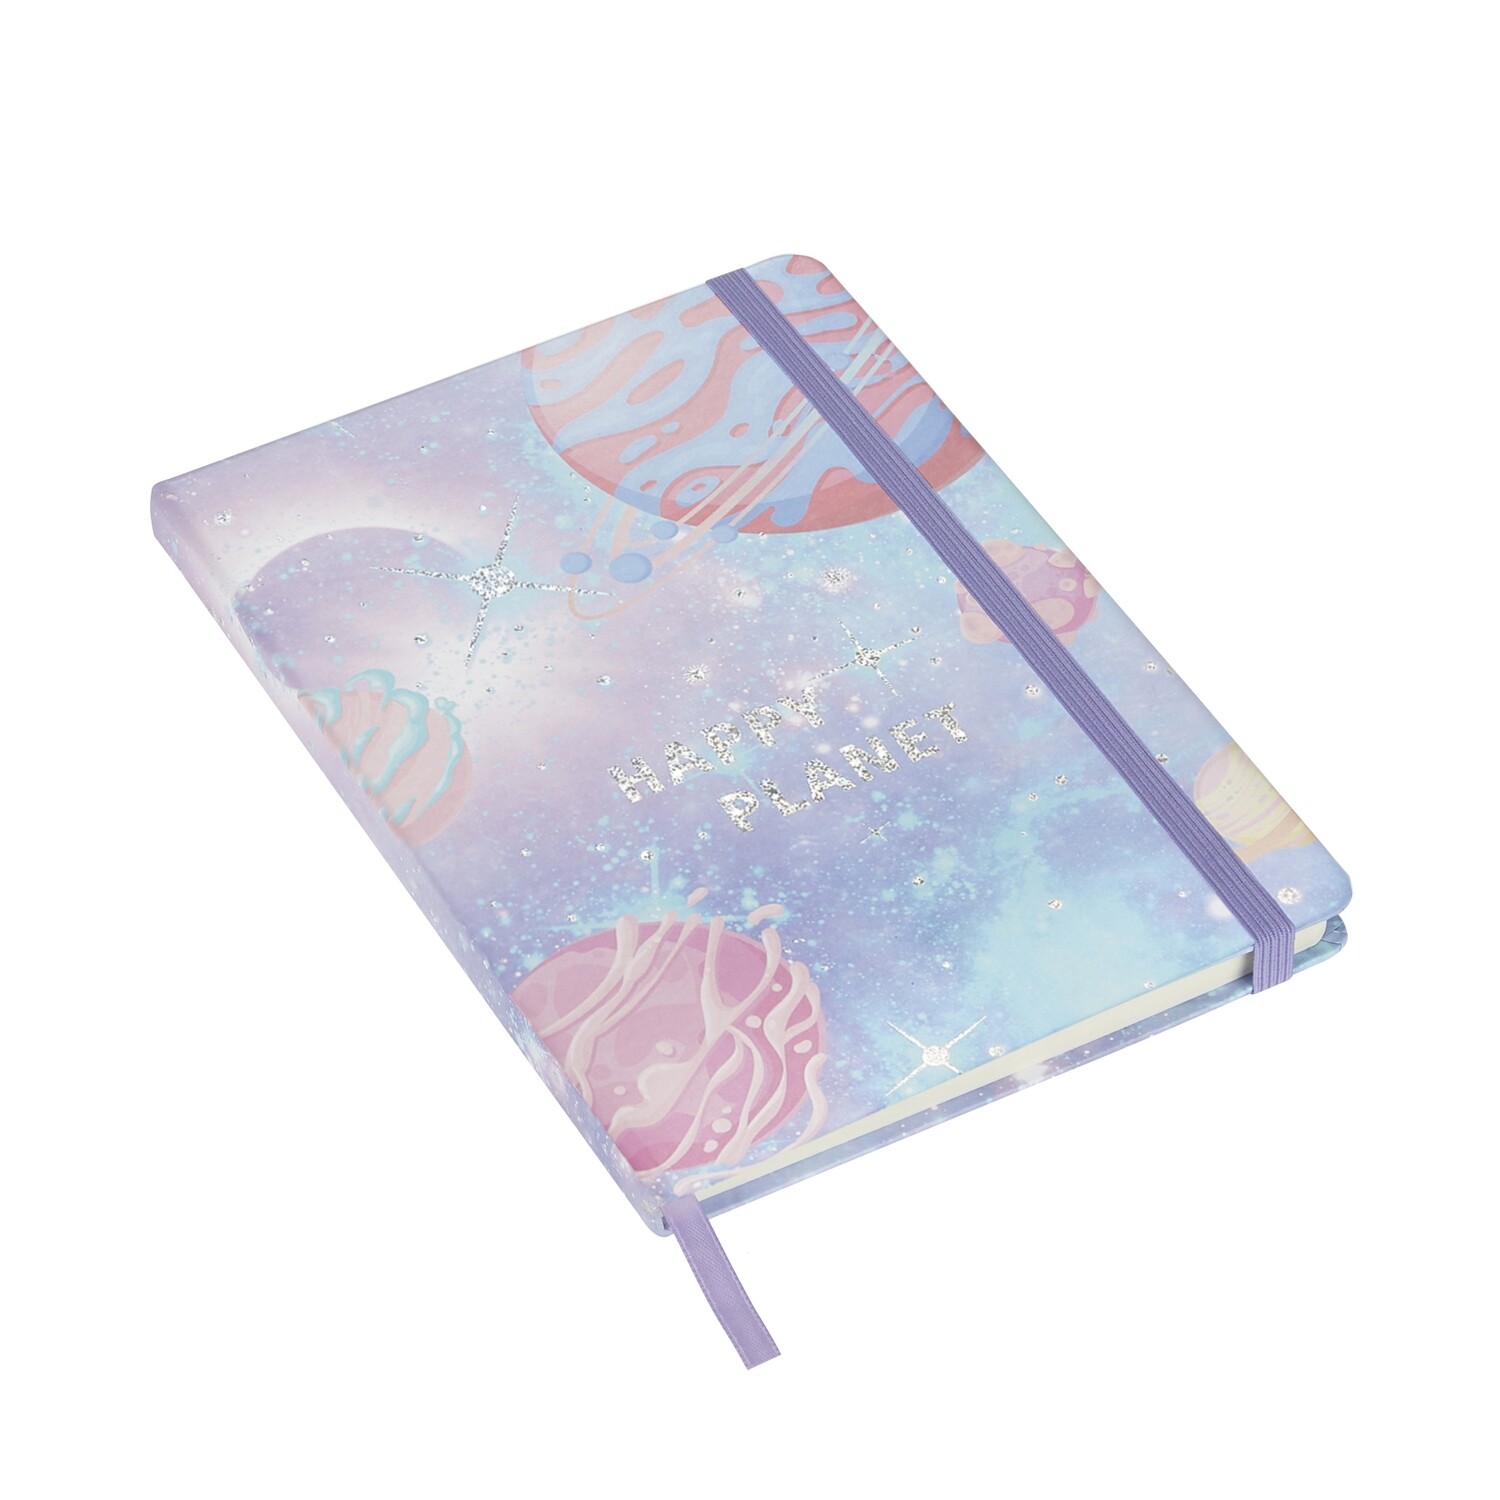 Happy Planet - Hardbound Lined Journal A5 Notebook